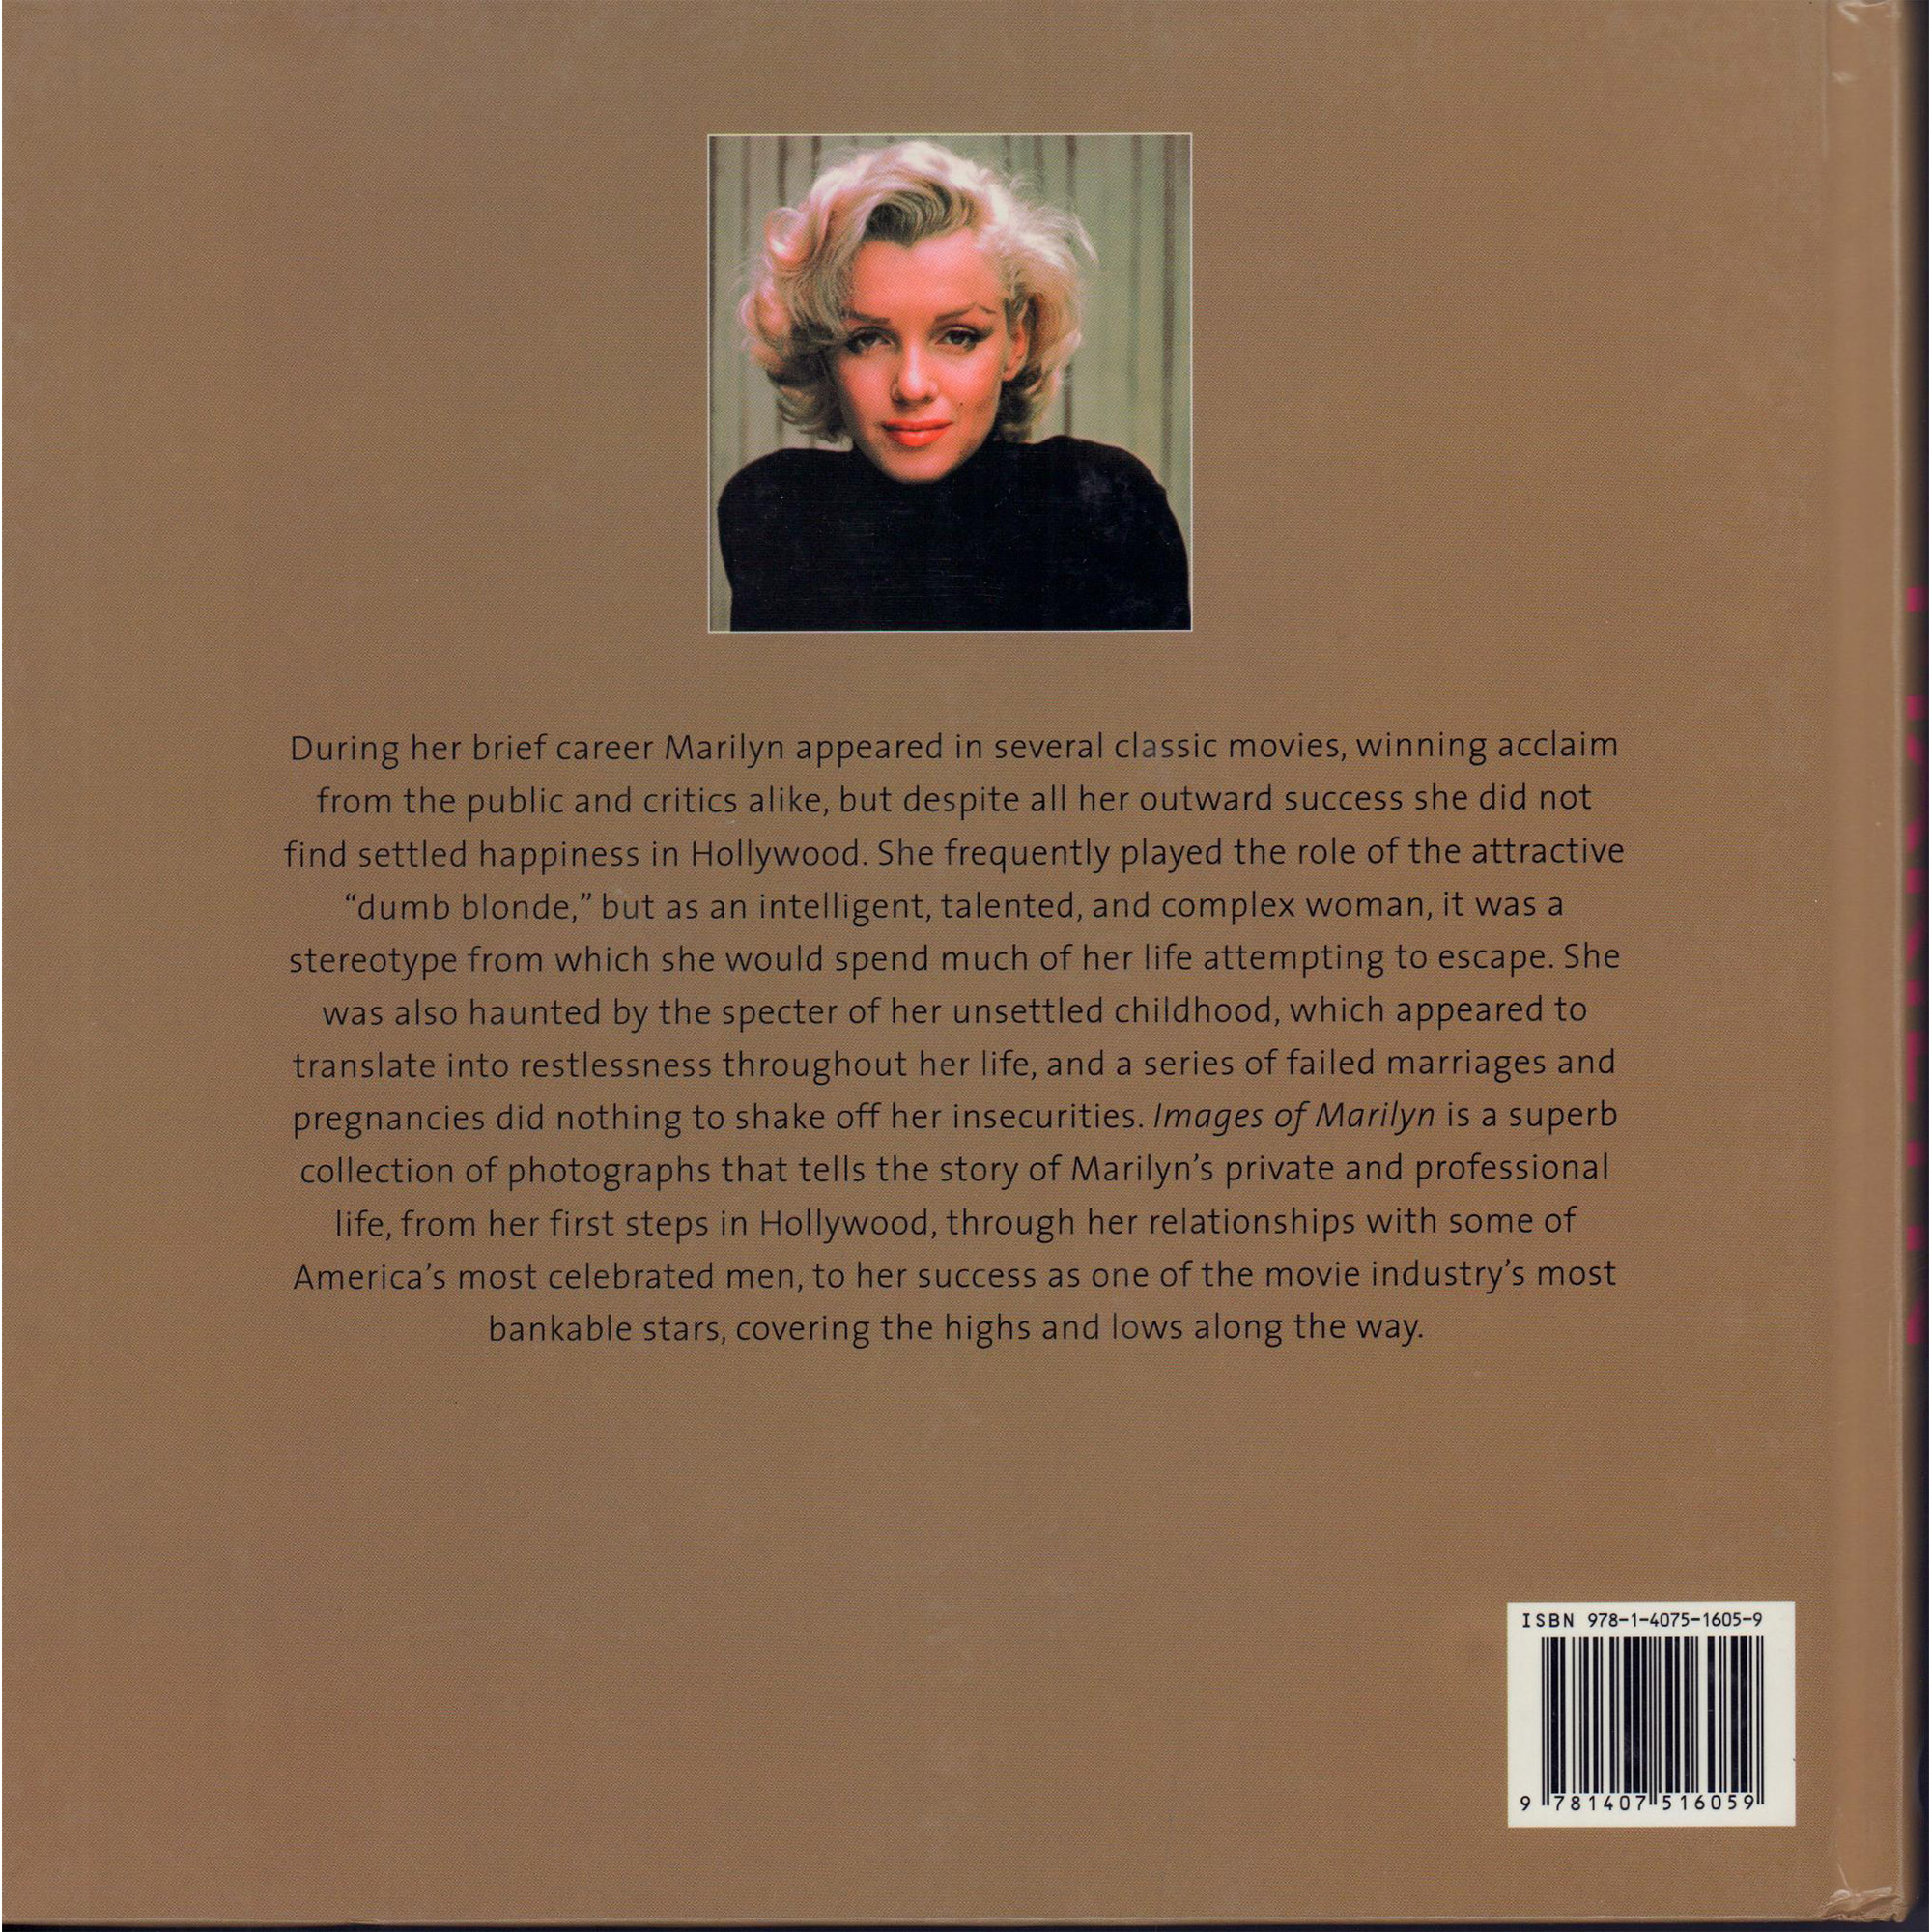 First Edition Hardcover Book, Images of Marilyn - Image 2 of 2